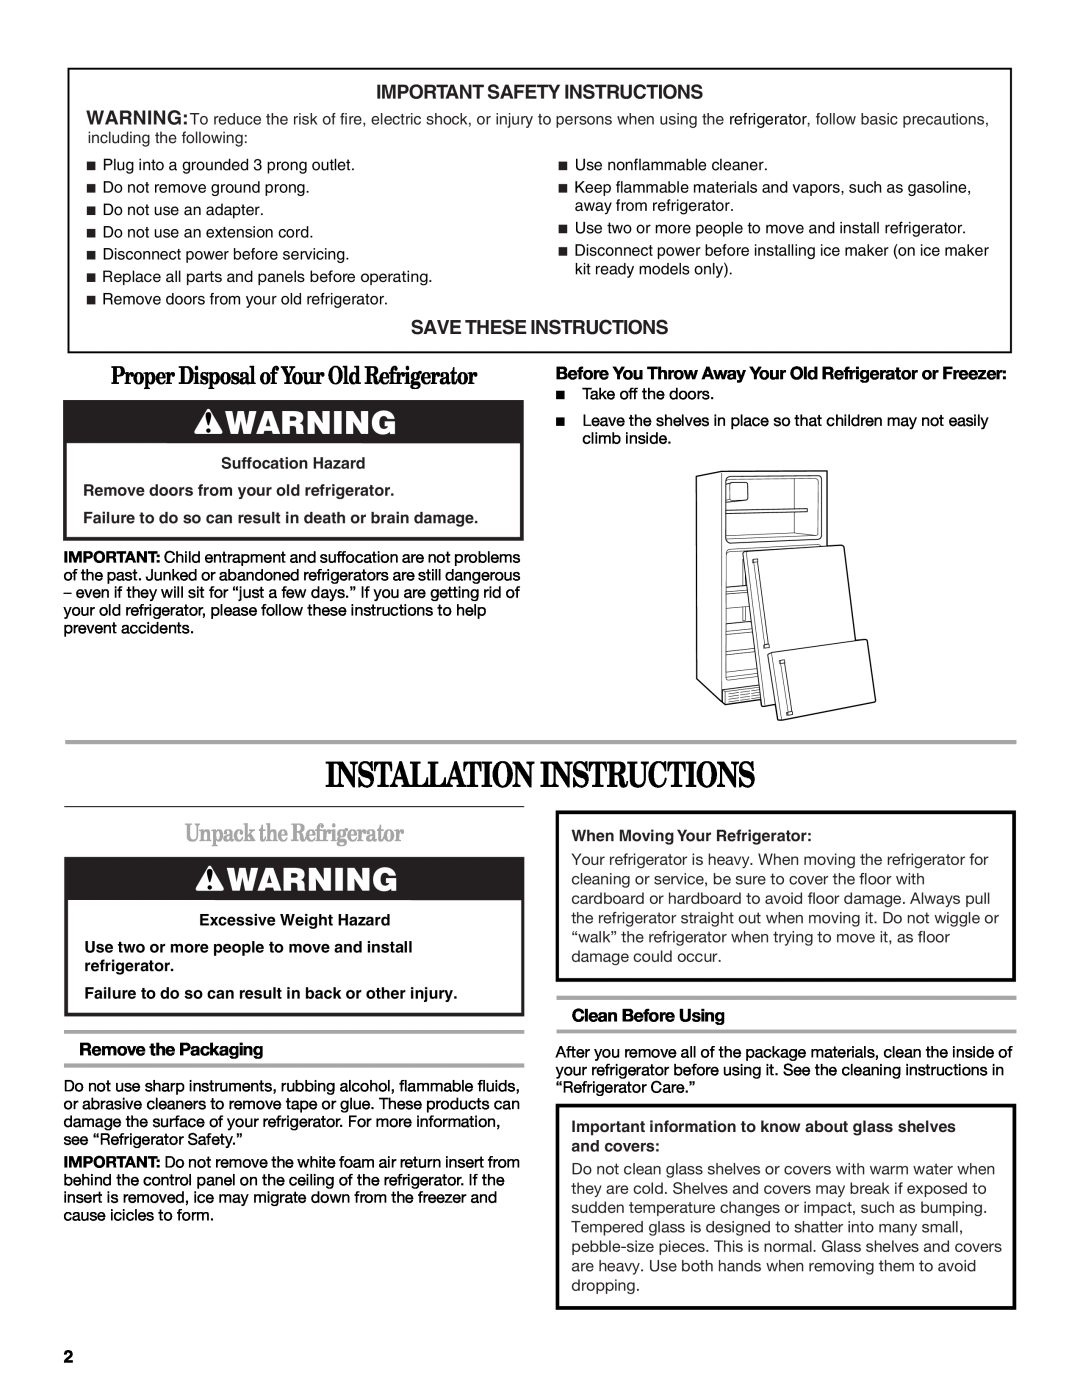 Whirlpool W10249202A Installation Instructions, Unpack the Refrigerator, Important Safety Instructions, Clean Before Using 